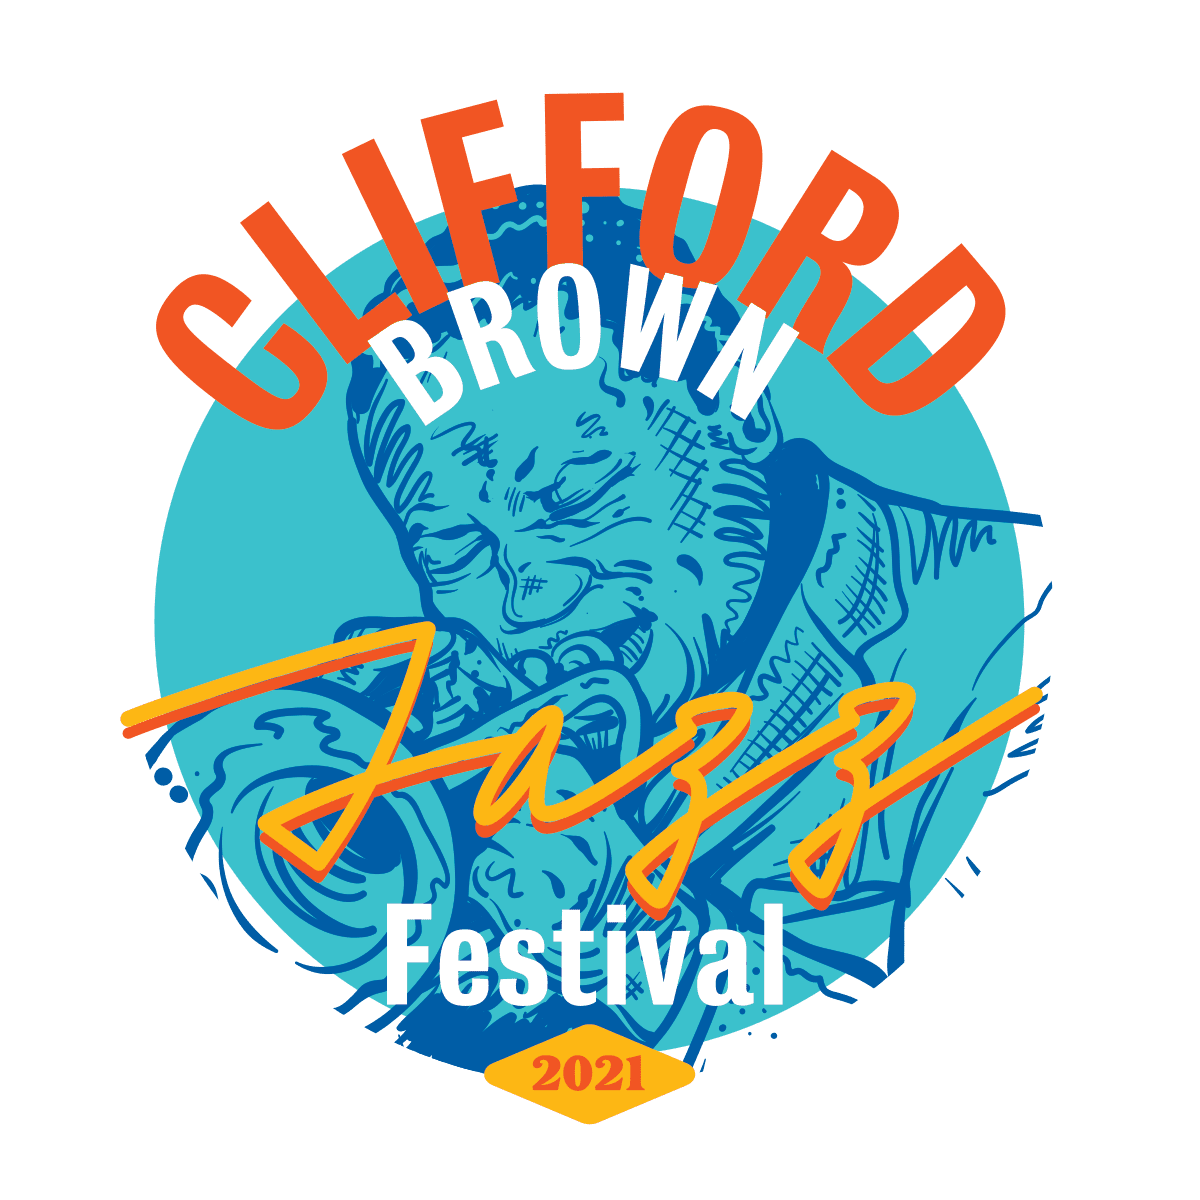 Clifford Brown jazz fest returns to Rodney Square in August